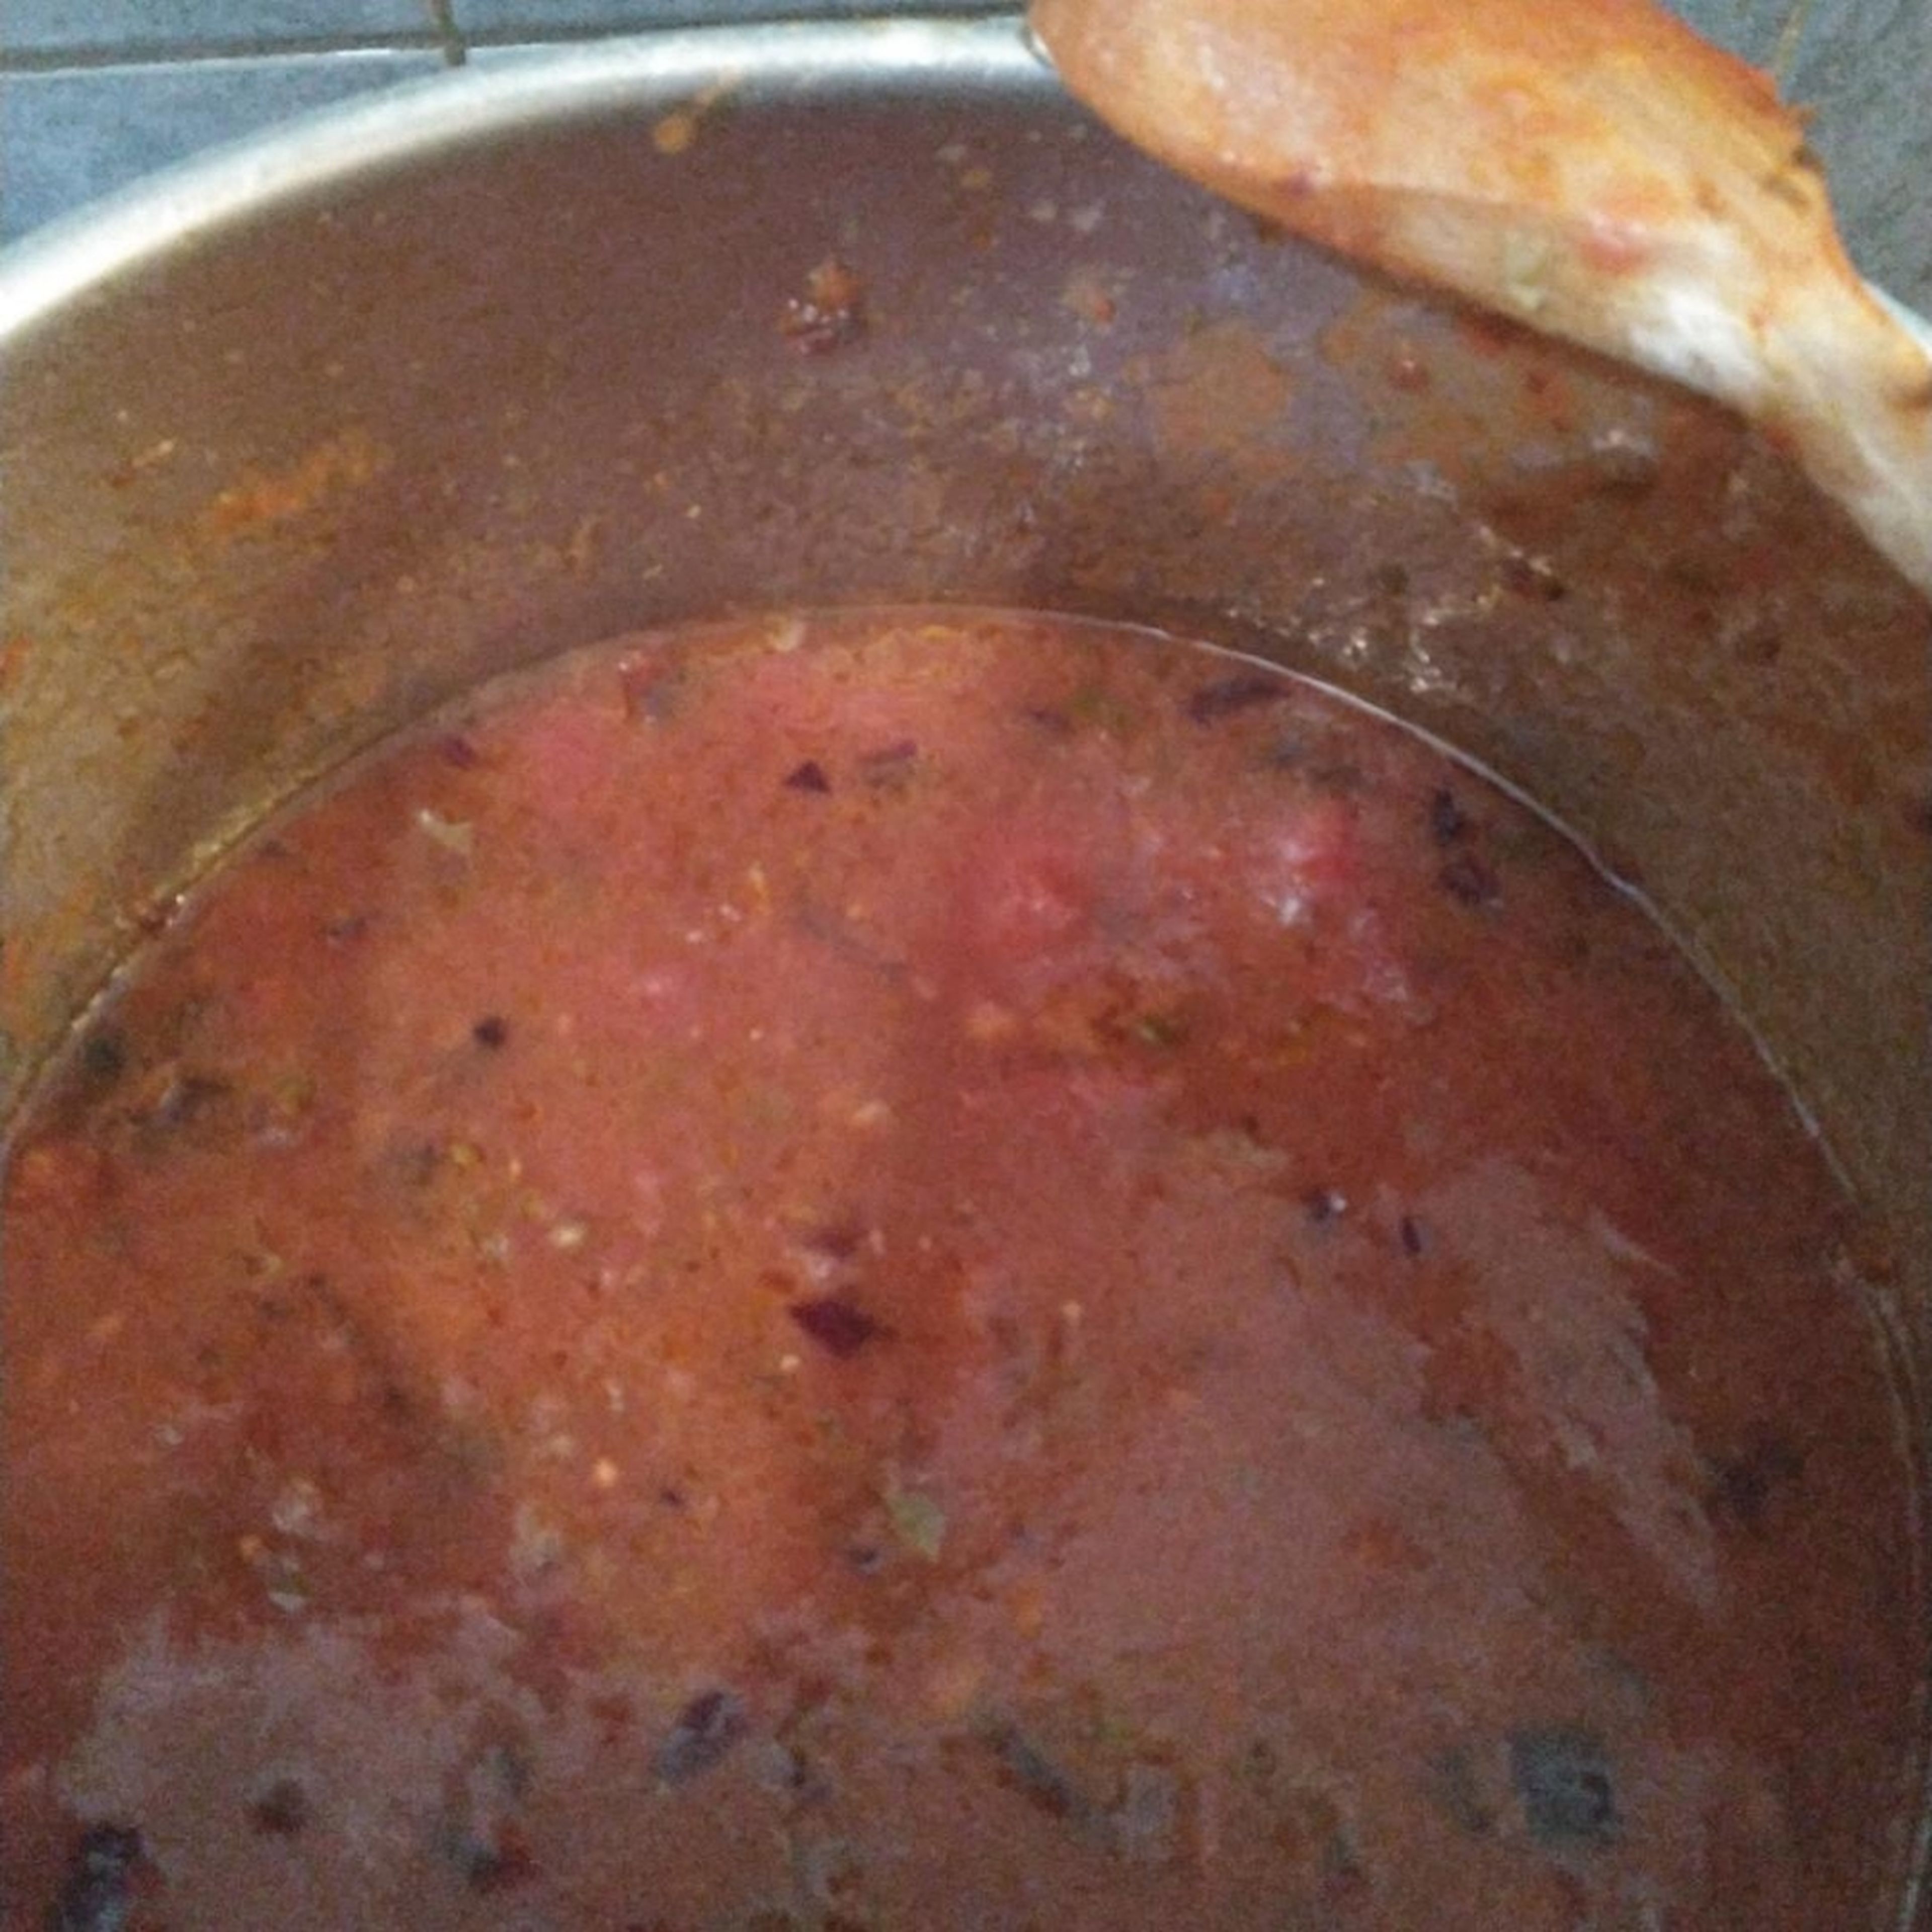 Add the tinned tomatoes. Fill up the can with water, swirl around and add to the pan. Add a pinch of sugar - brown sugar will give it a rich flavour, but this isn't an ingredient you need to fuss over. Simmer over a low heat for 15 minutes, stirring occasionally.